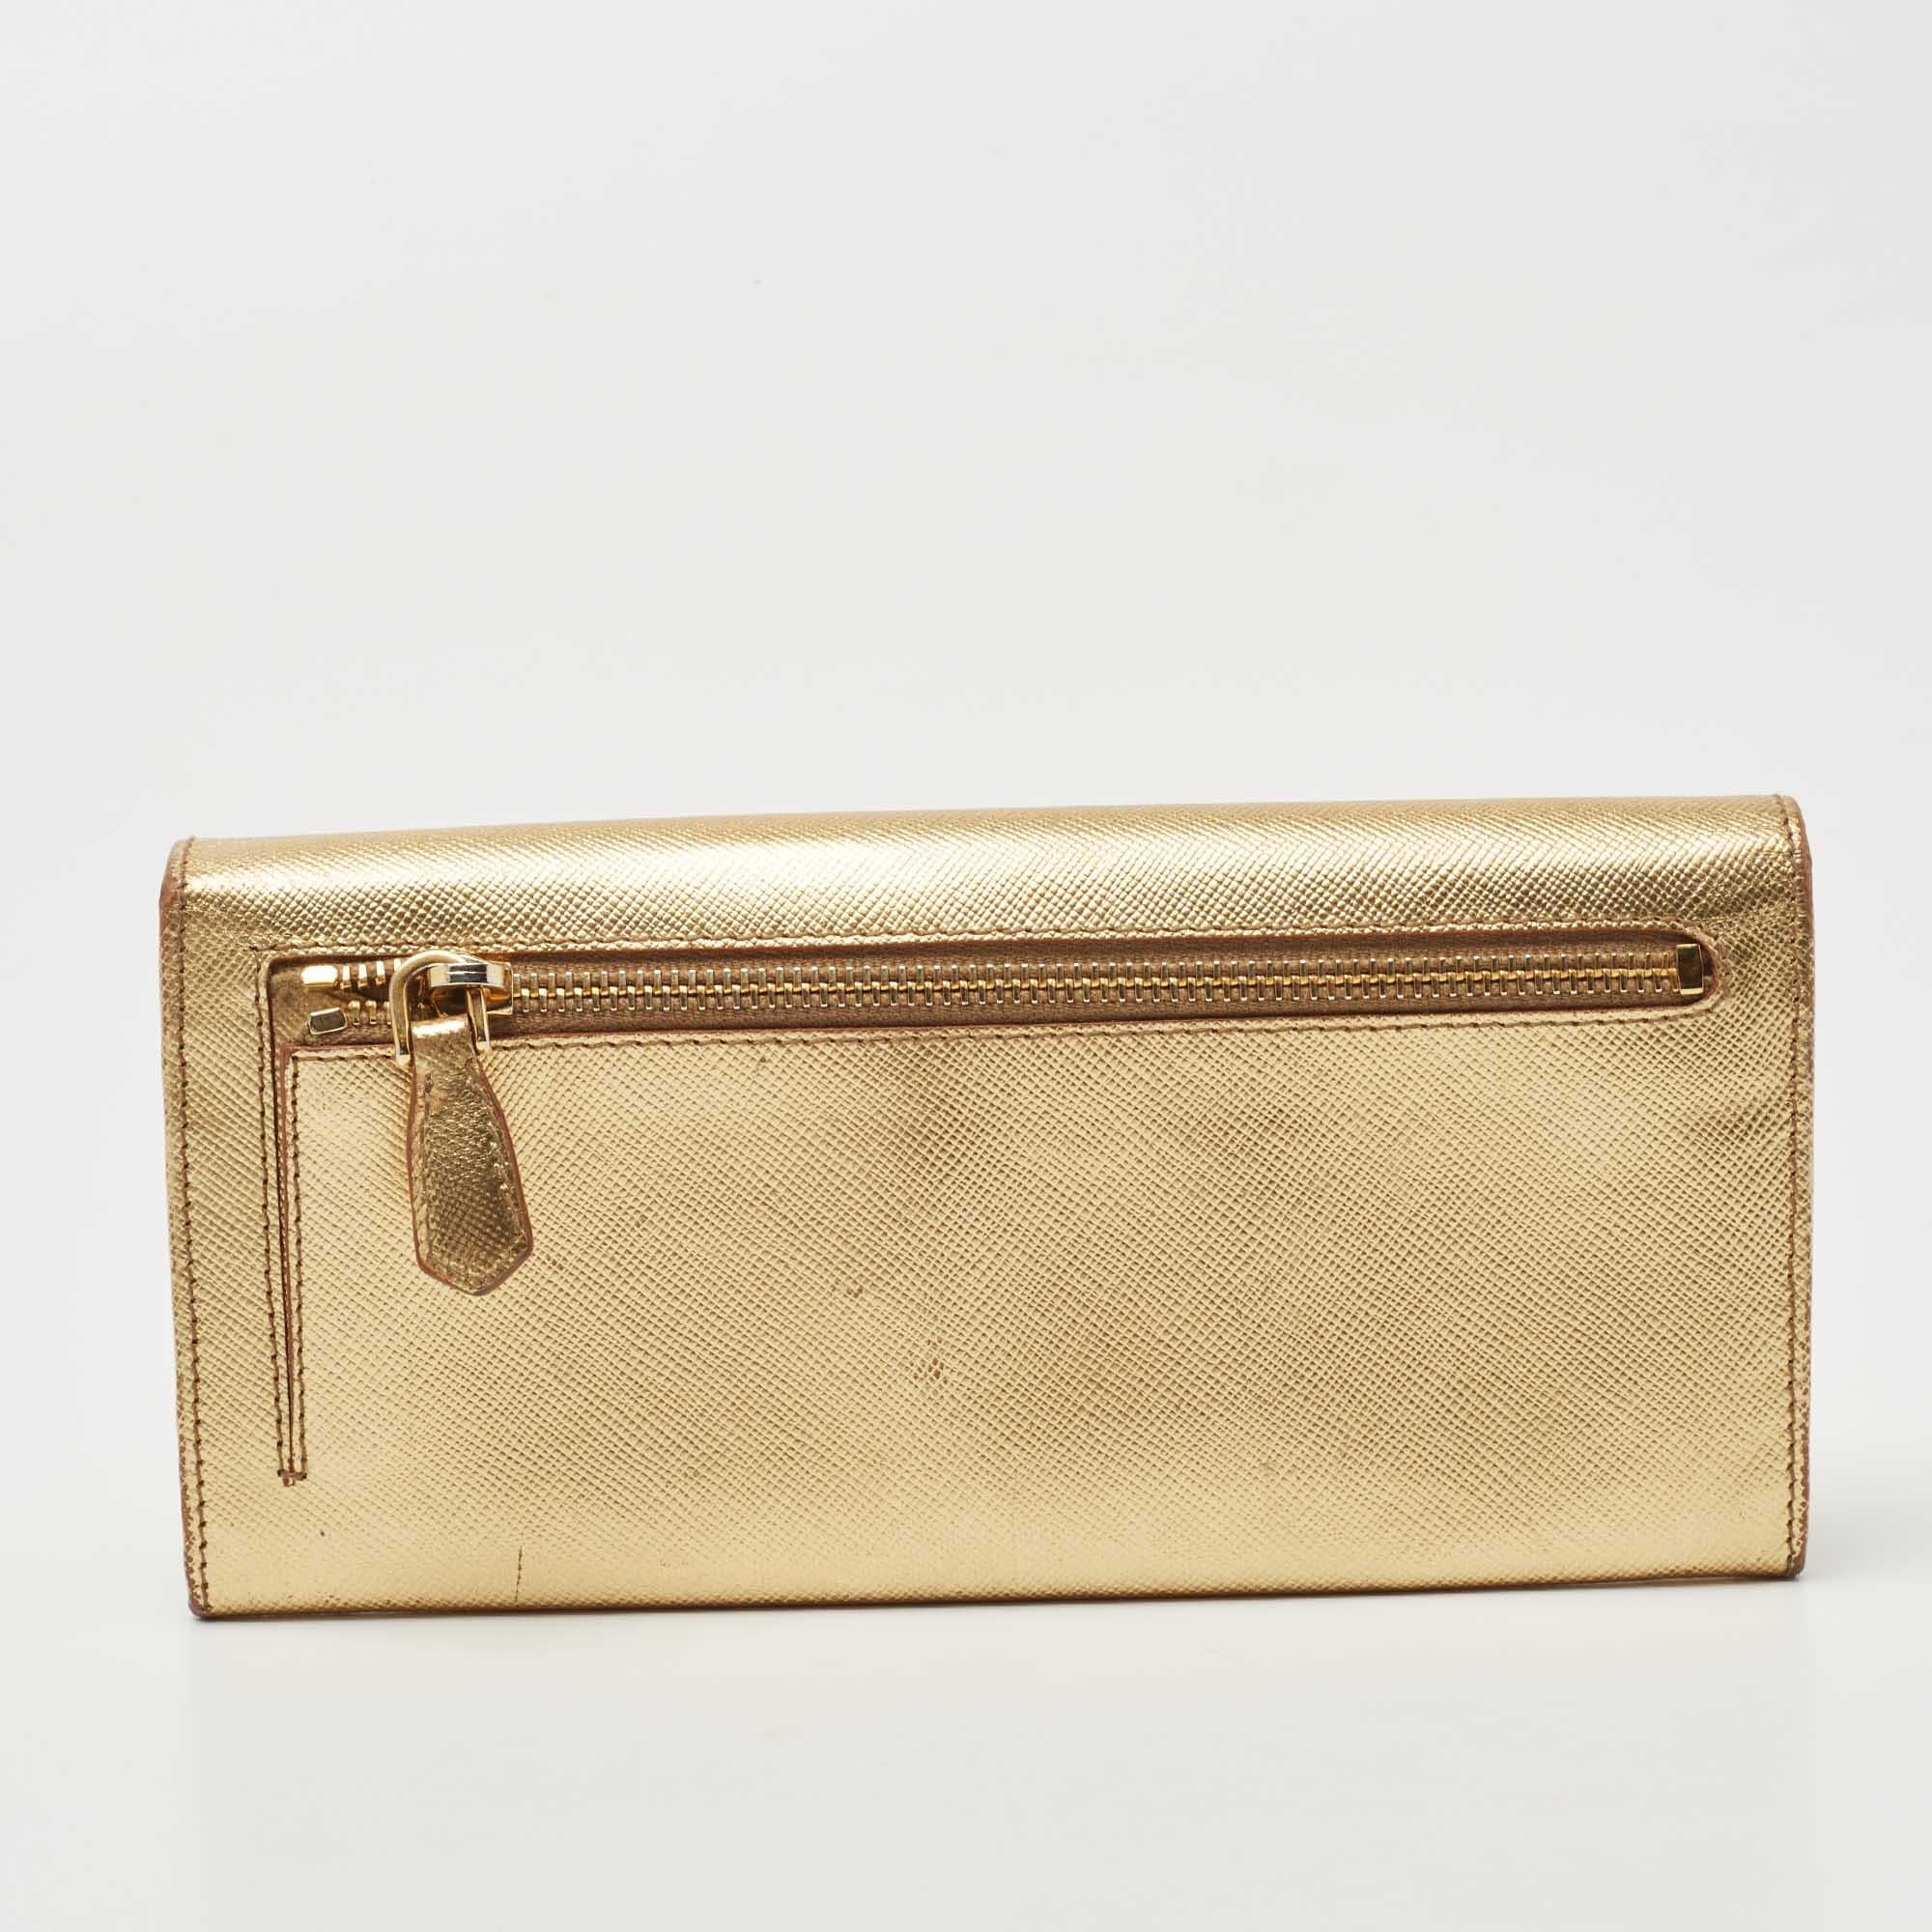 This continental wallet from Prada is a must-have fashionable accessory. With its classy exterior and practical shape, this wallet functions as more than just a stylish carry-on. It is made with beige Saffiano Lux leather and has a gold-toned logo